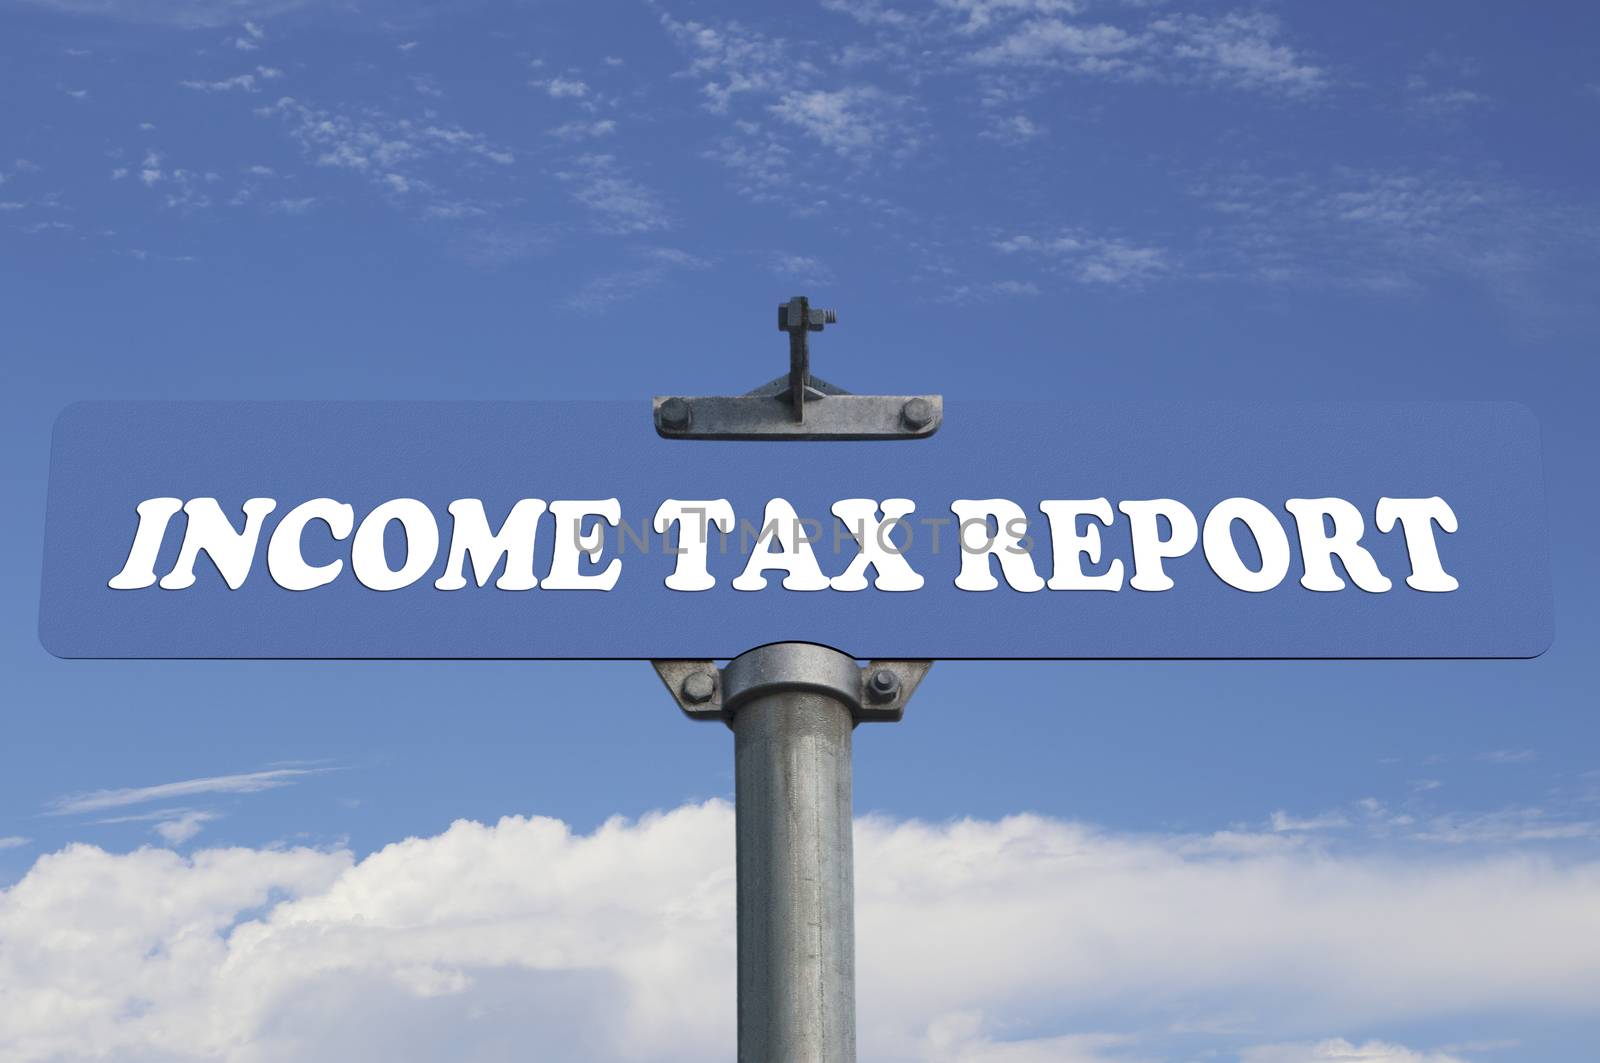 Income tax report road sign